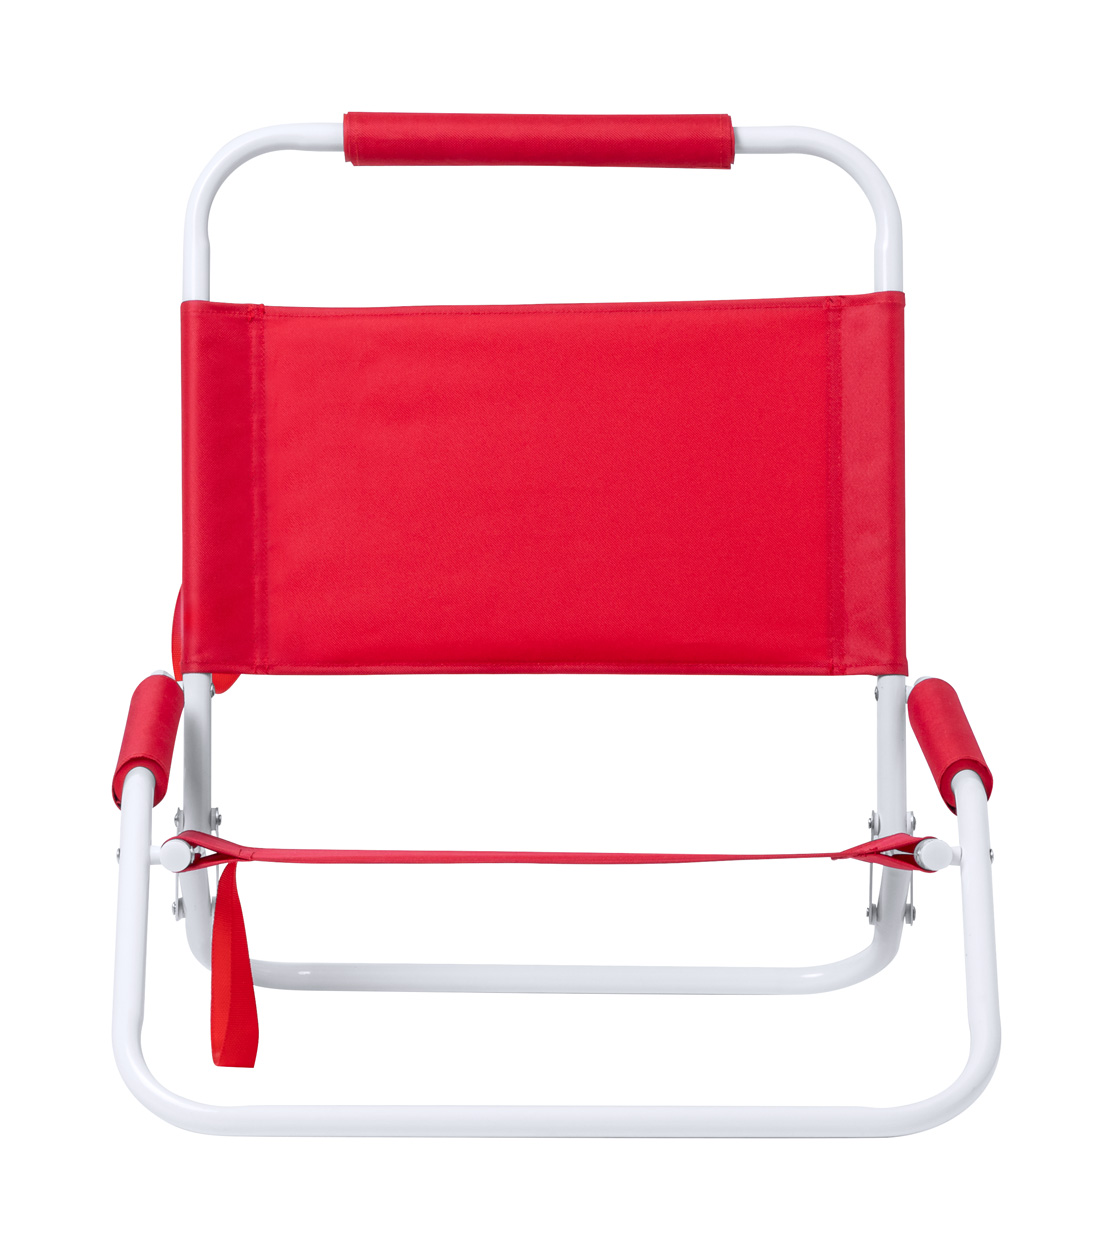 Coswel beach chair - red